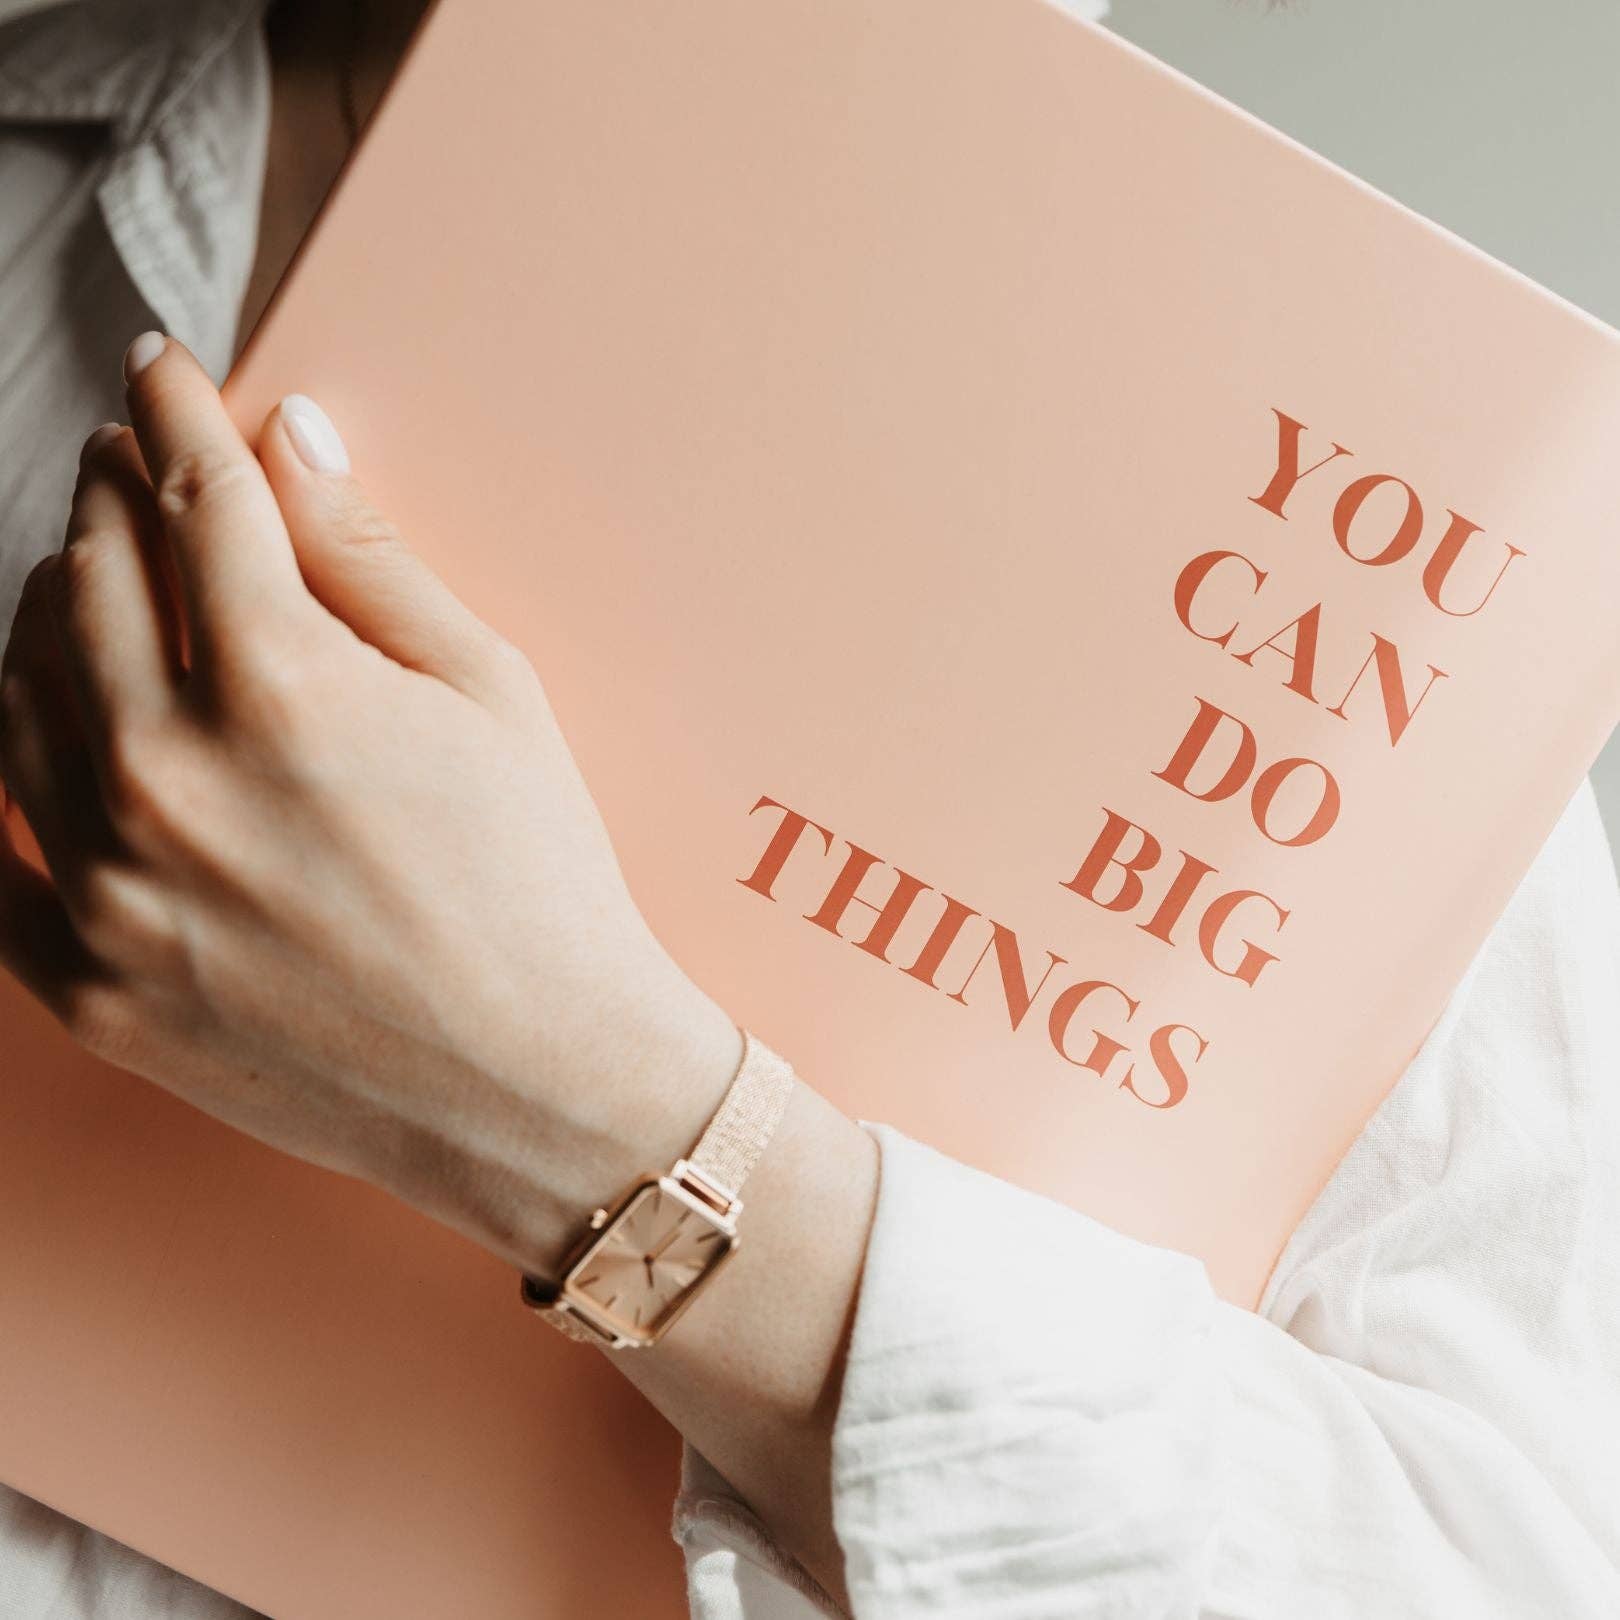 Vision Board Kit: You can do big things by Lamare